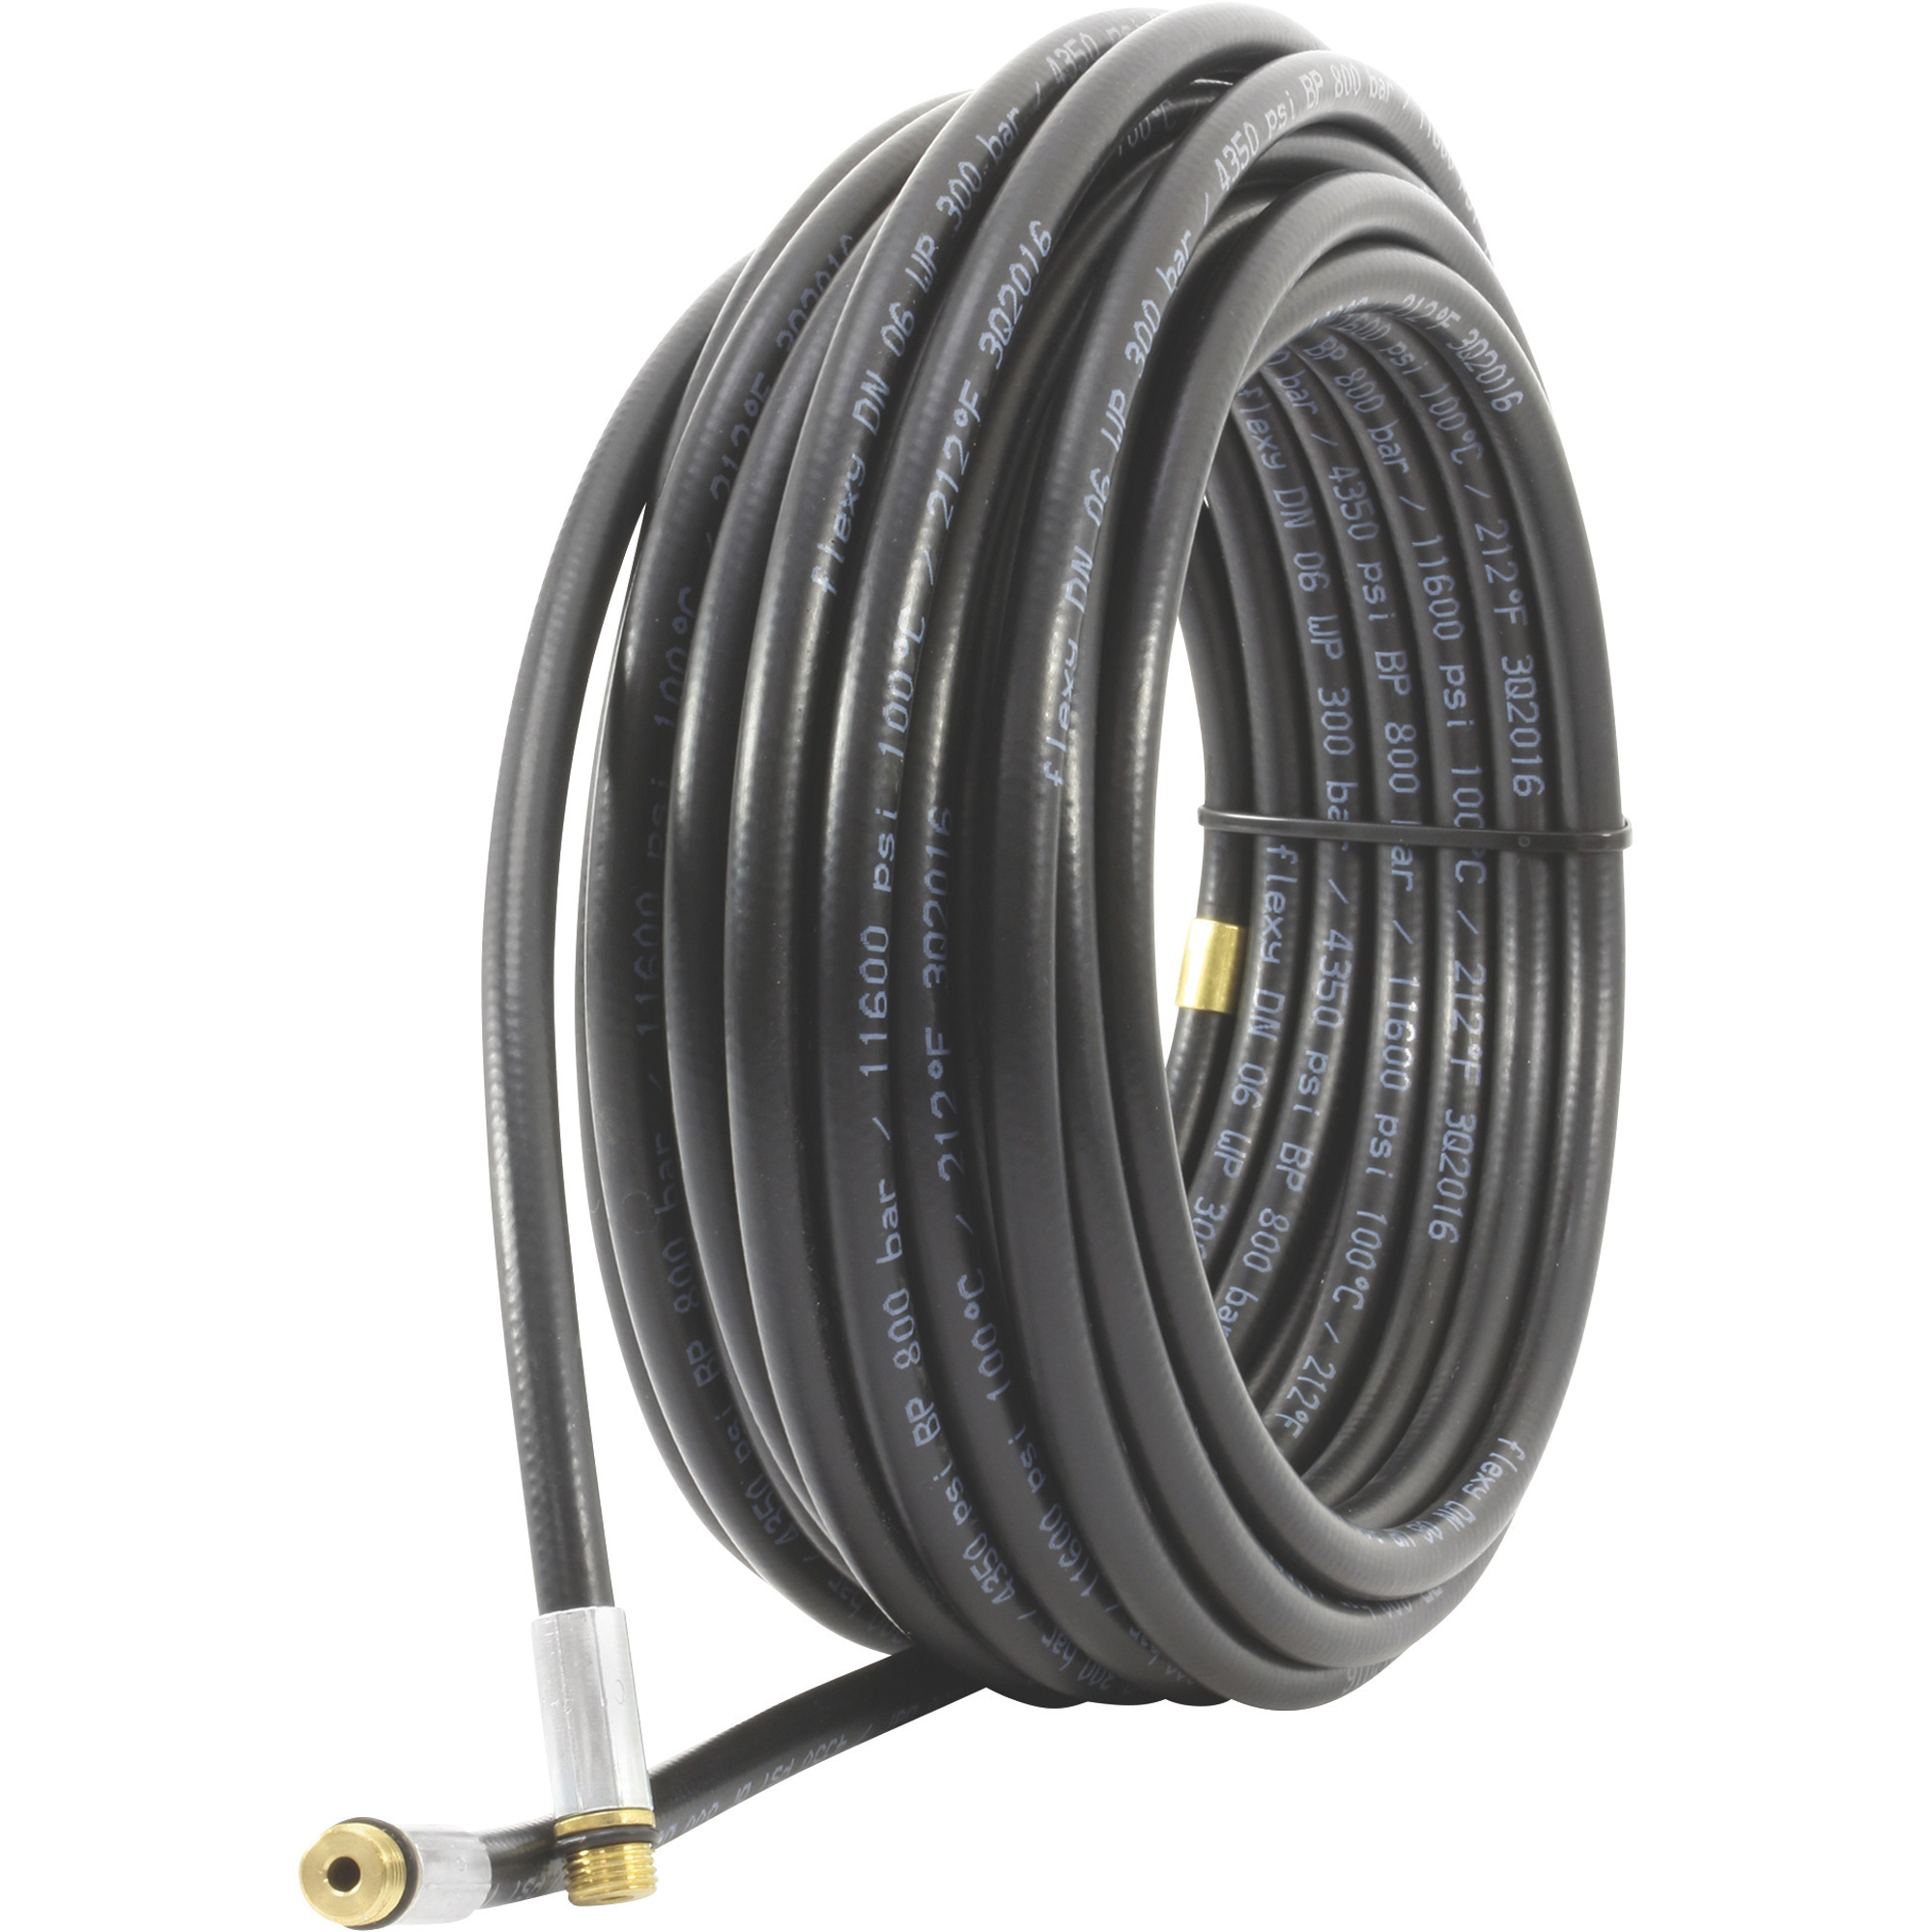 DTE Sewer Jetting Hose, 4500 PSI, 50ft. x 1/4Inch